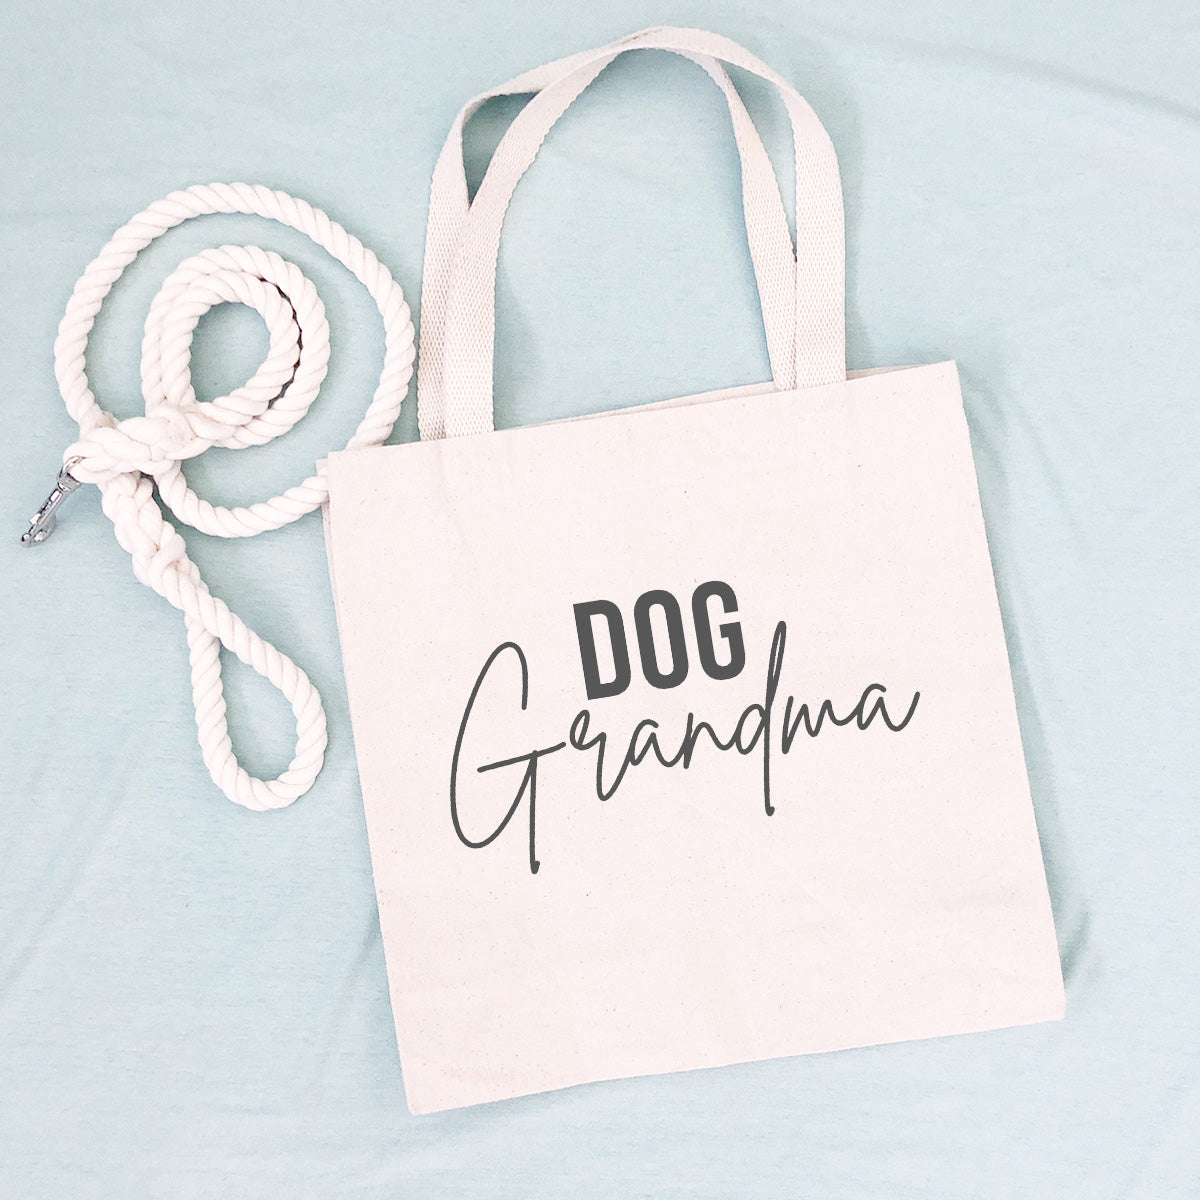 Tote bag that says "DOG Grandma" with a white leash on a blue background